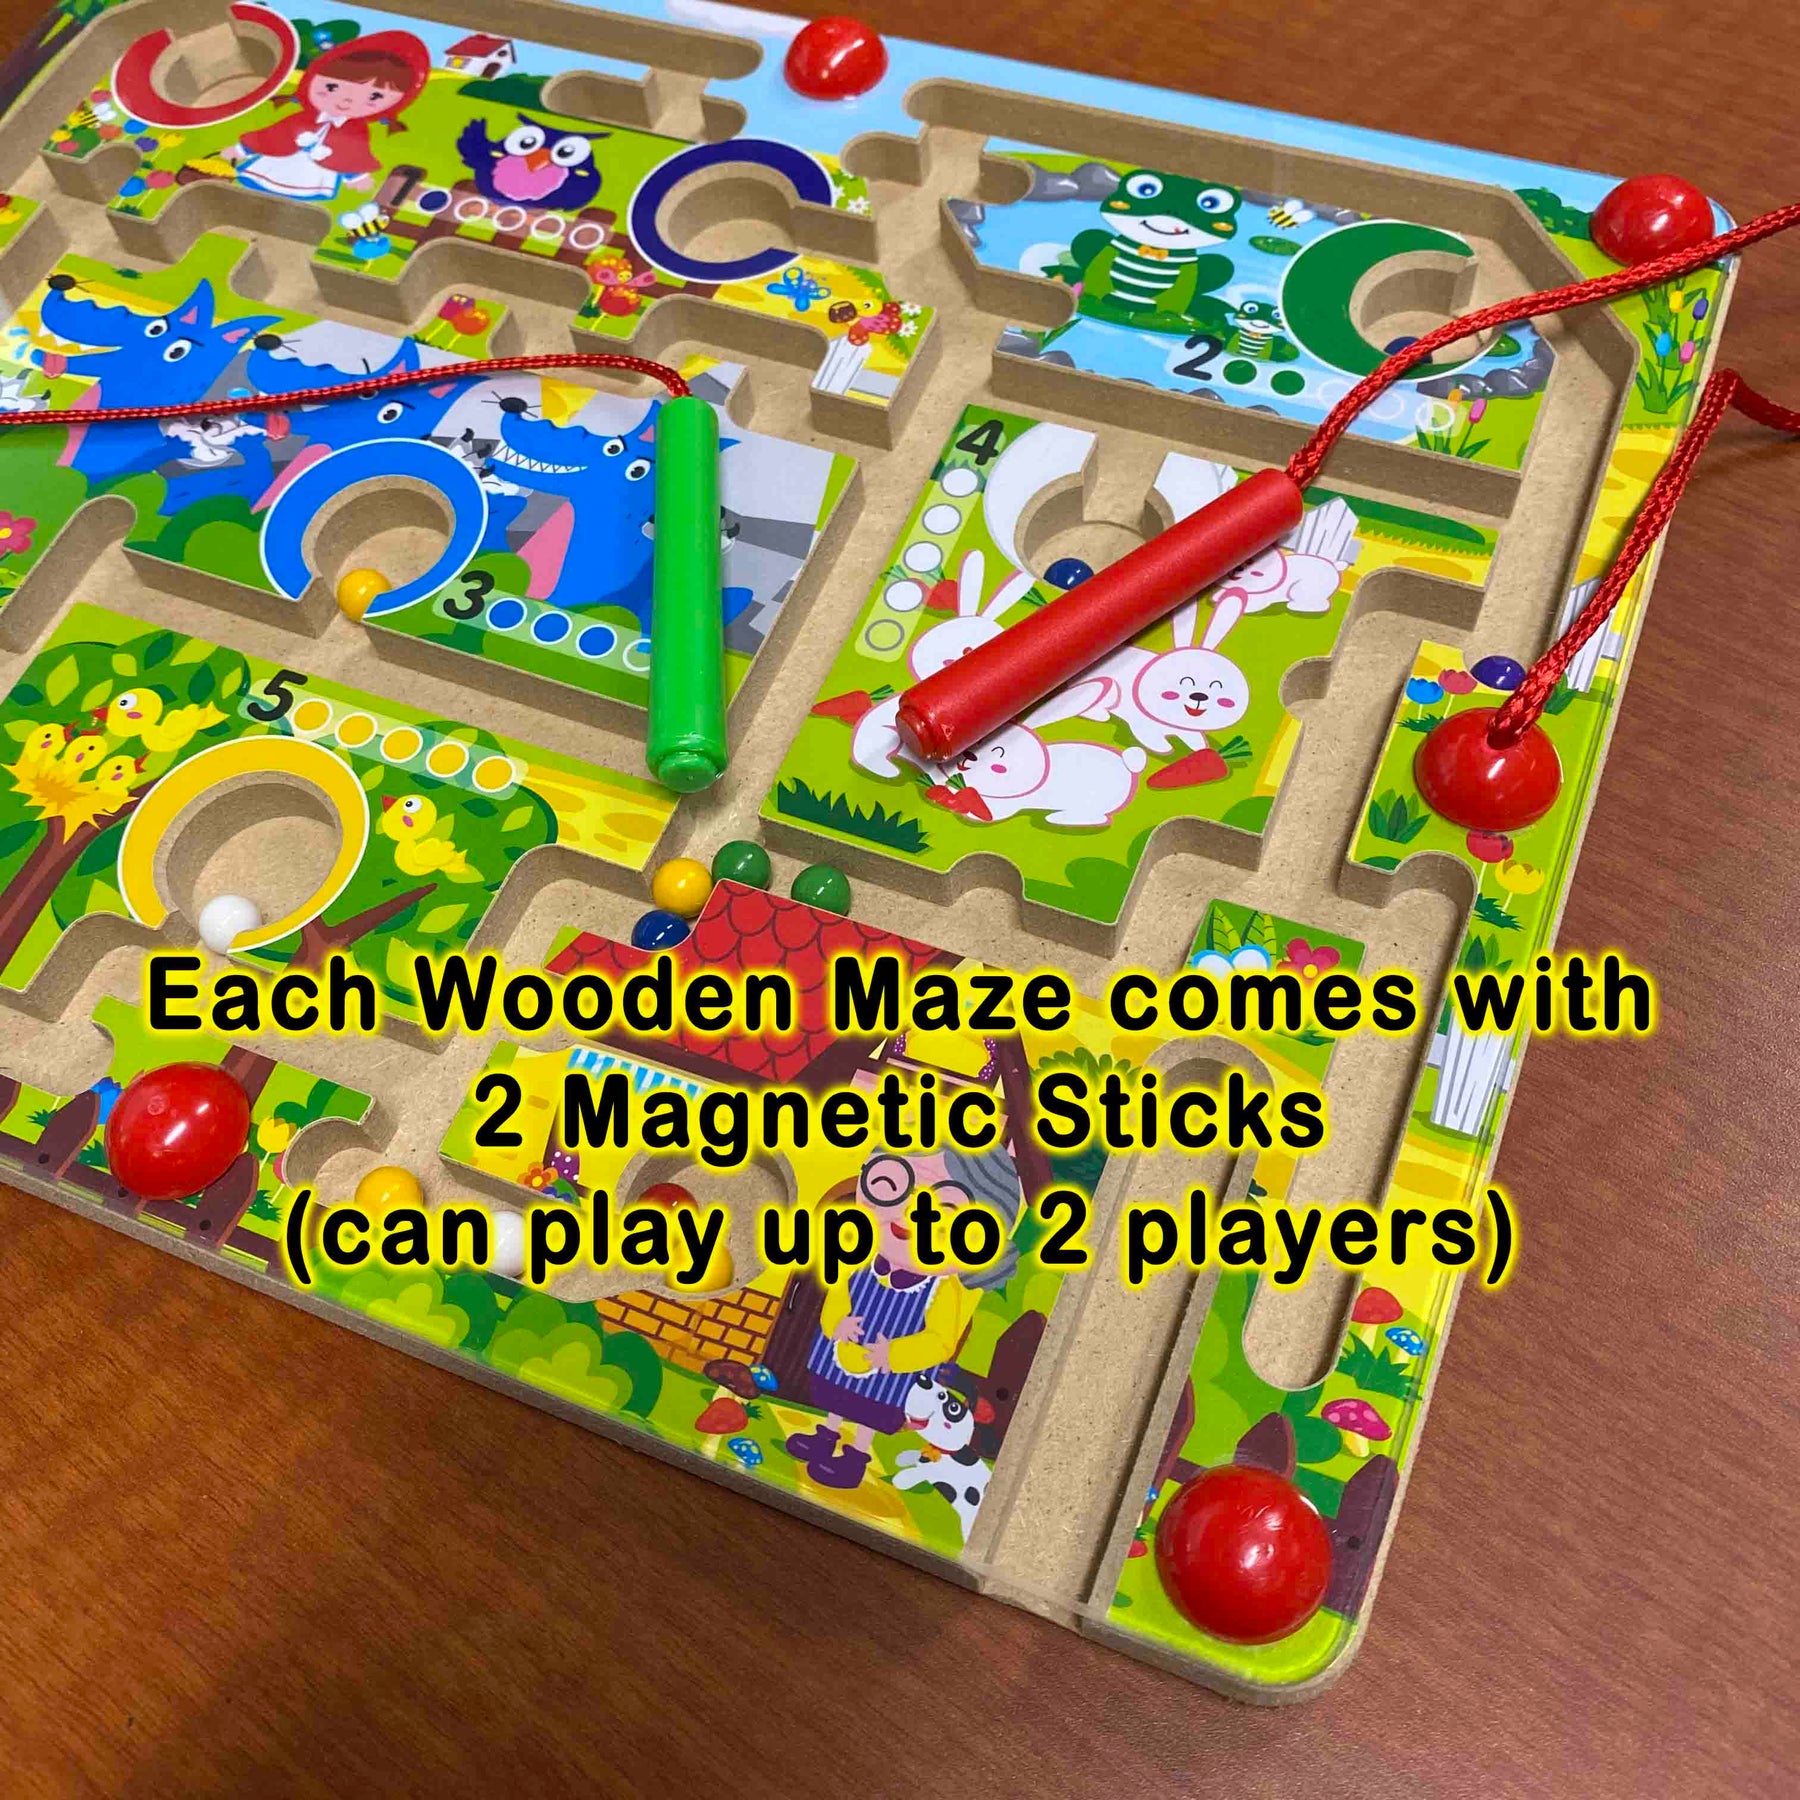 Magnetic Wooden Maze Toy for Children Age 3 and above - Little Red Riding Hood | Early Child Development Games Great Gift Ideas for Kids